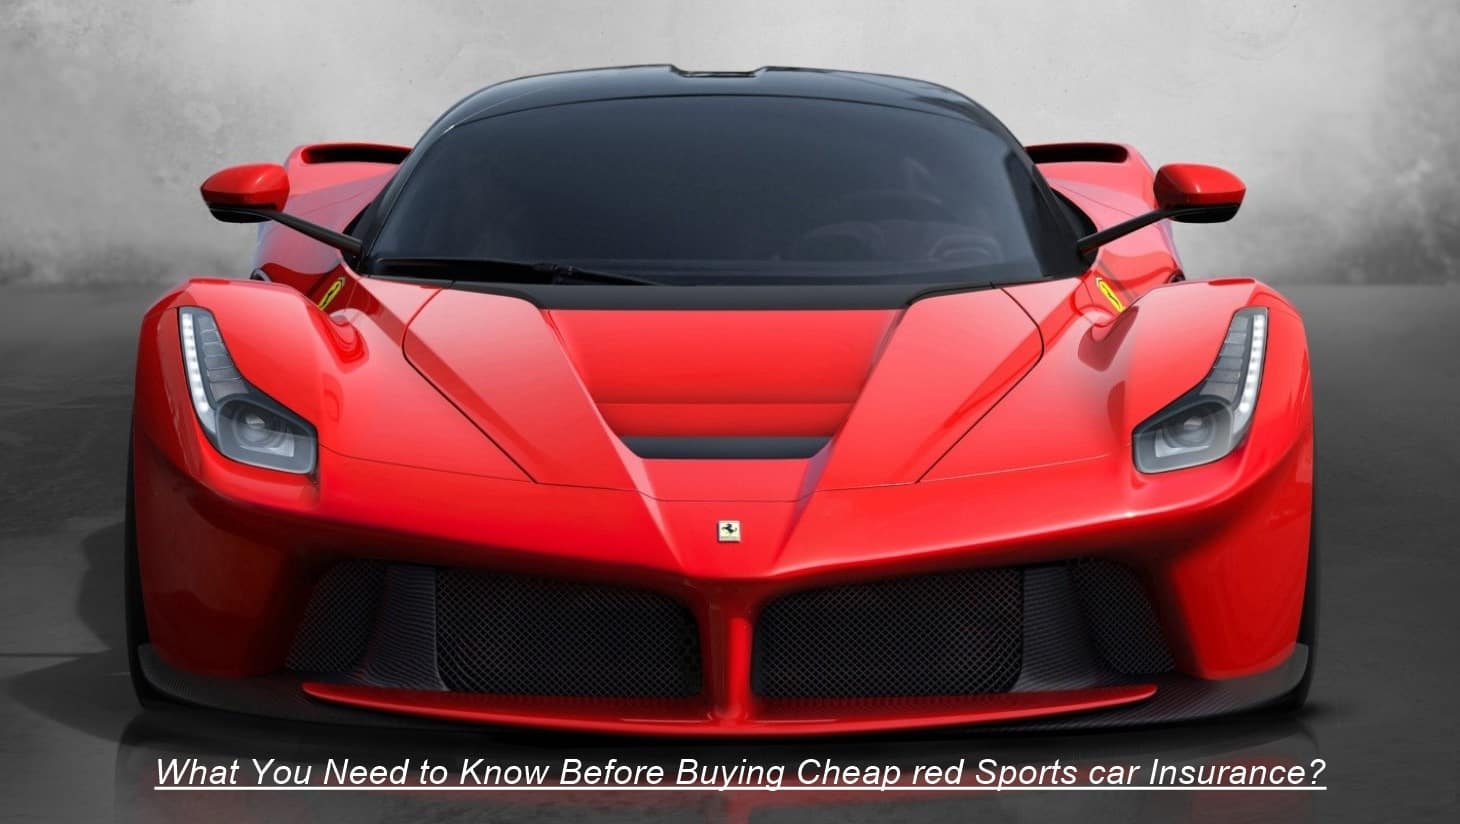 What You Need to Know Before Buying Cheap red Sports car Insurance?